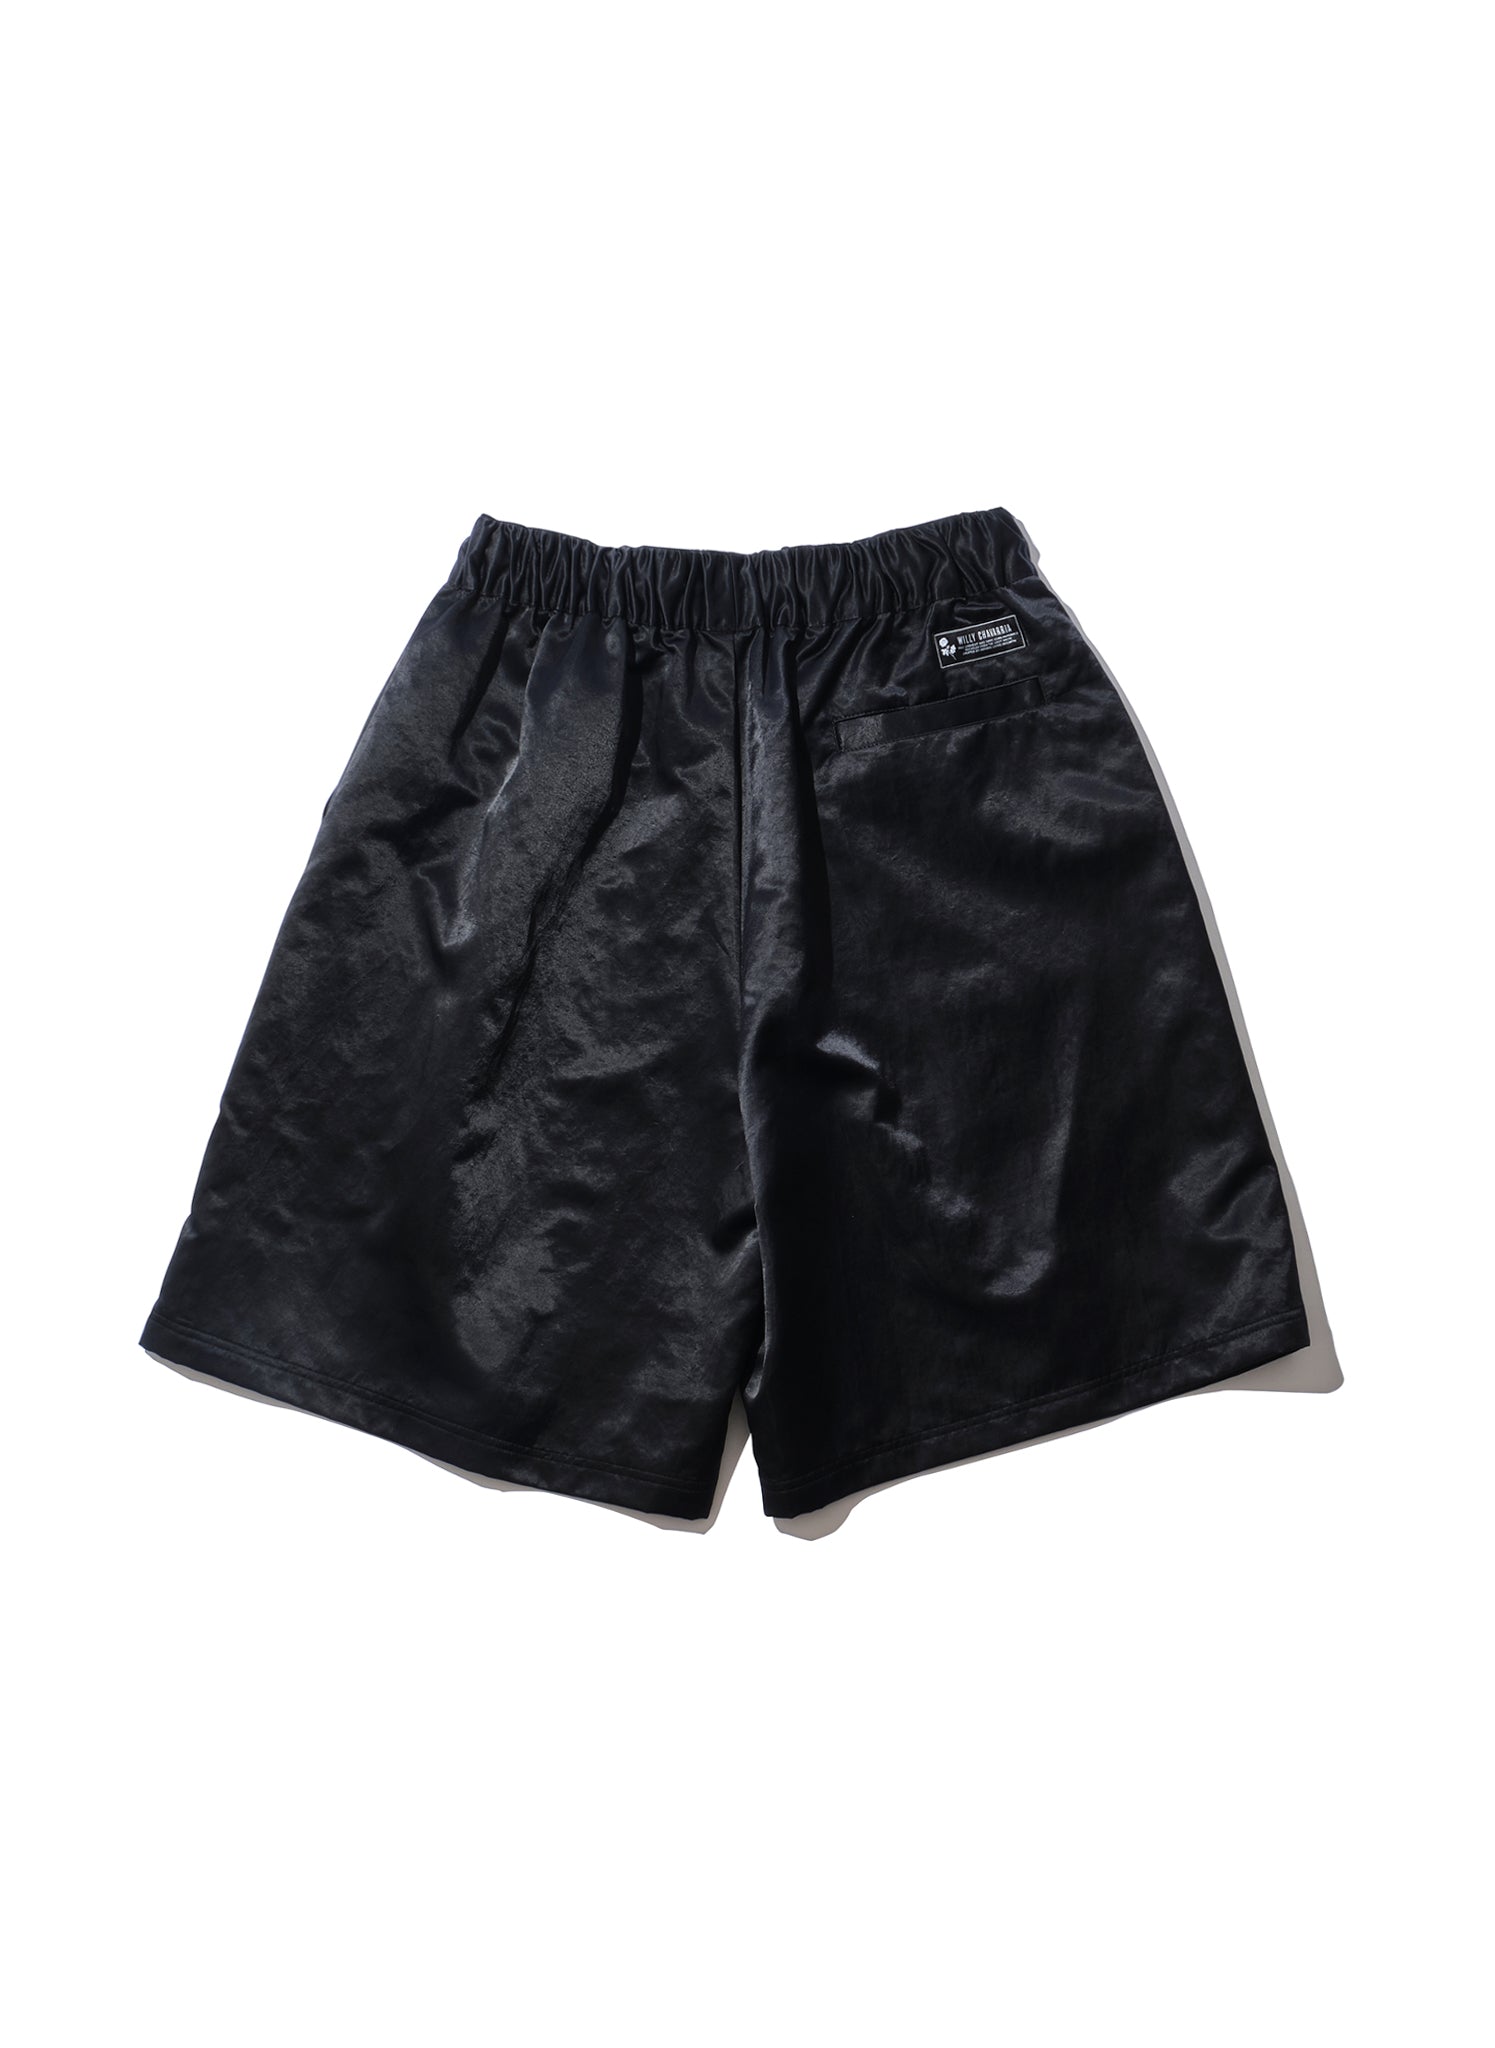 【CCTB Exclusive】 WILLY CHAVARRIA / SATIN SHORT PANTS